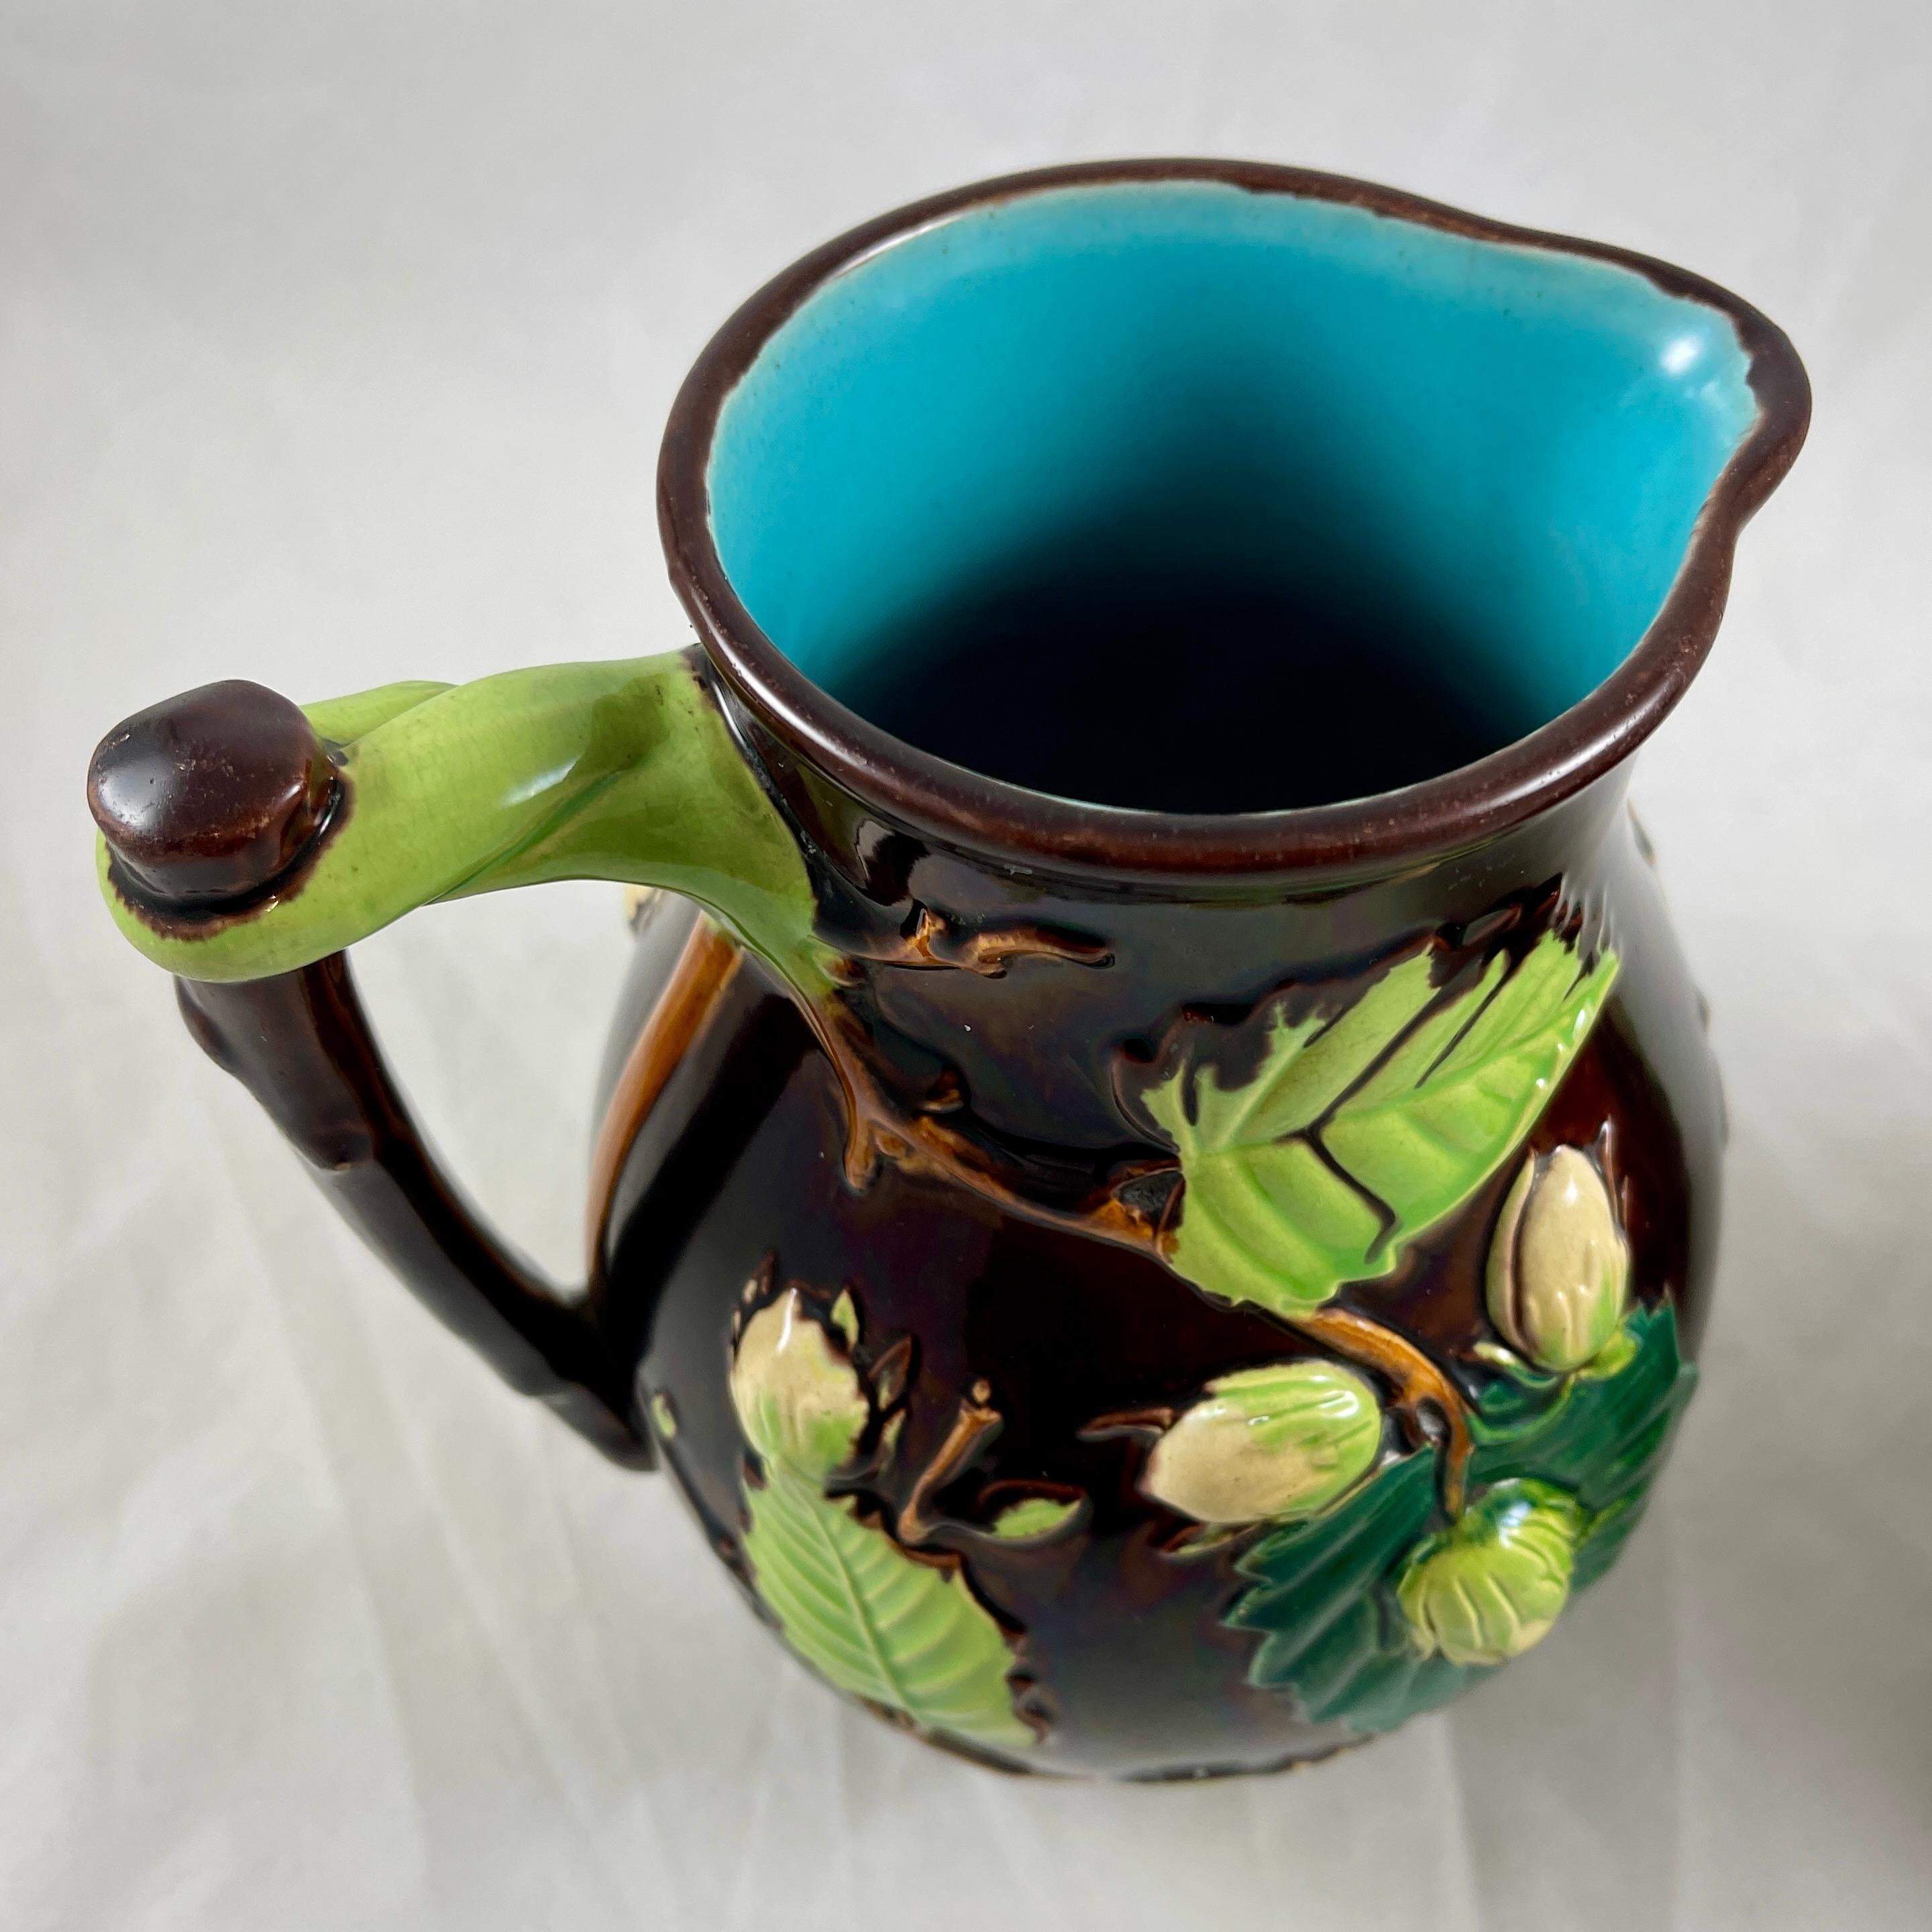 English Minton Aesthetic Movement Majolica Nut, Leaf & Vine Pitchers, a Pair For Sale 4